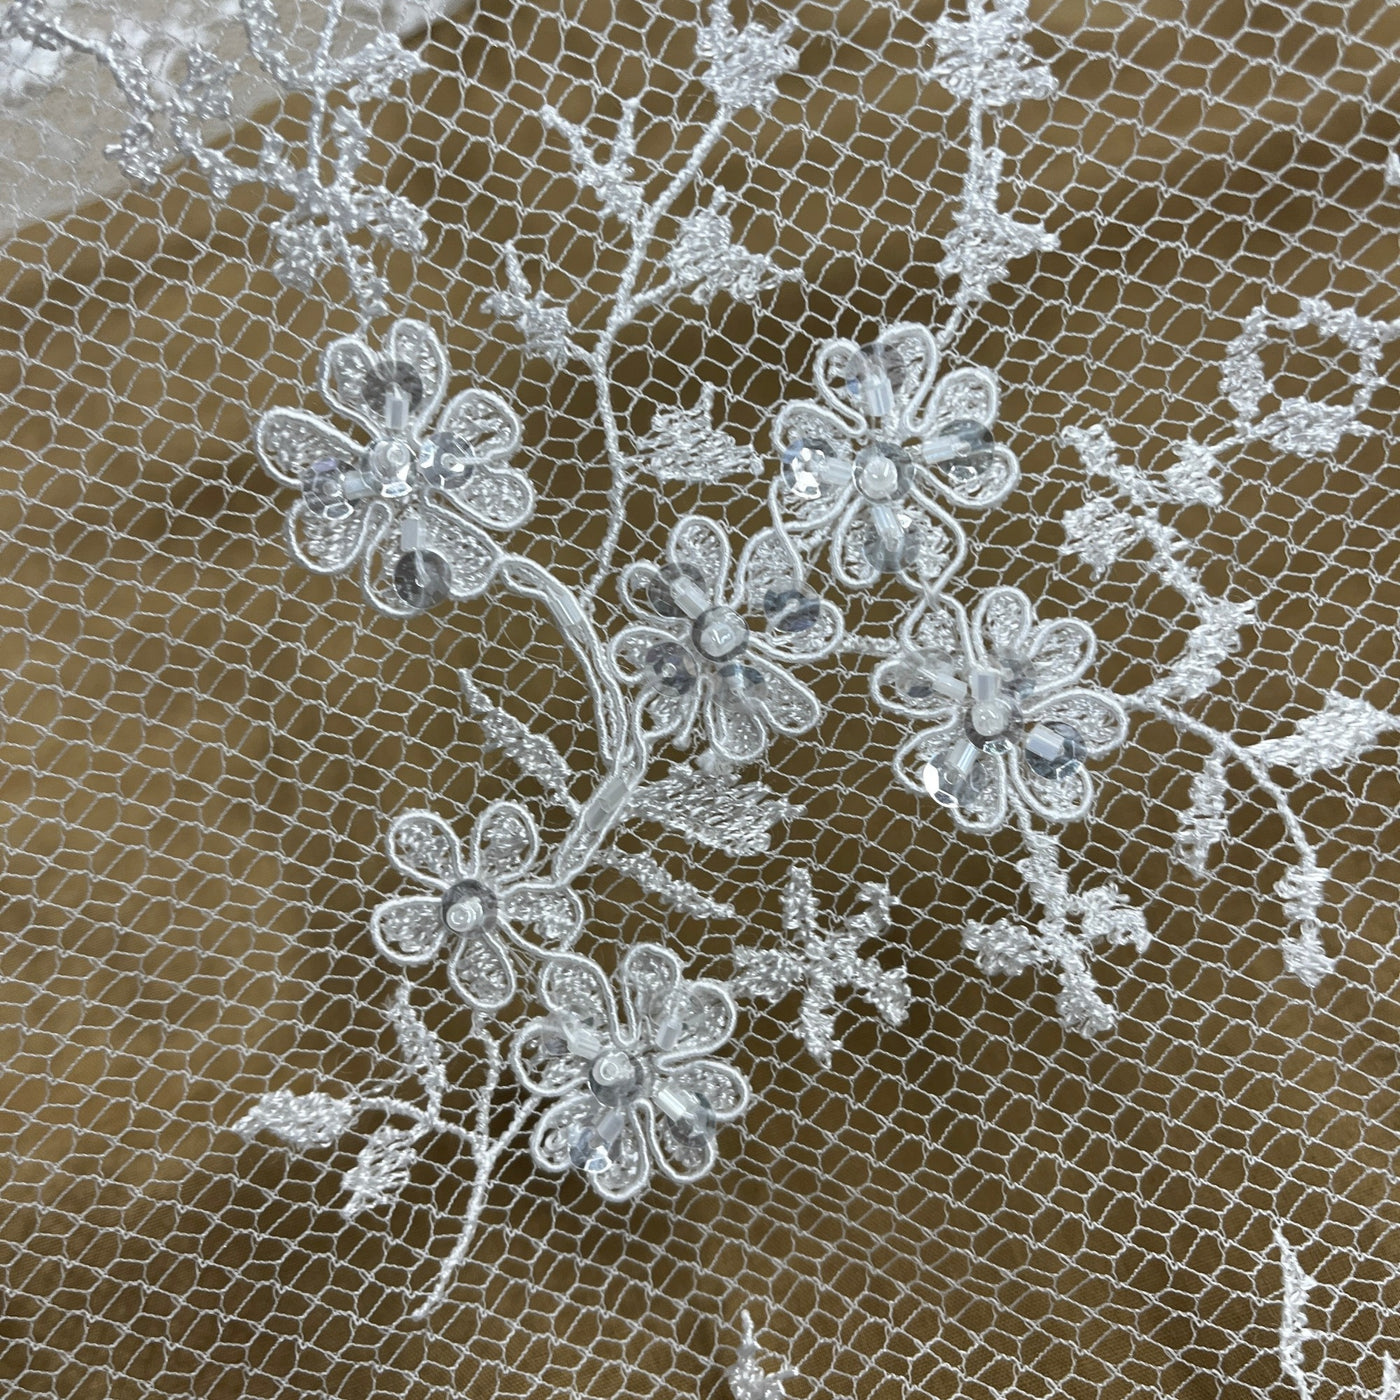 Beaded Lace Fabric Embroidered on 100% Polyester Net Mesh | Lace USA - 96731W-BP White